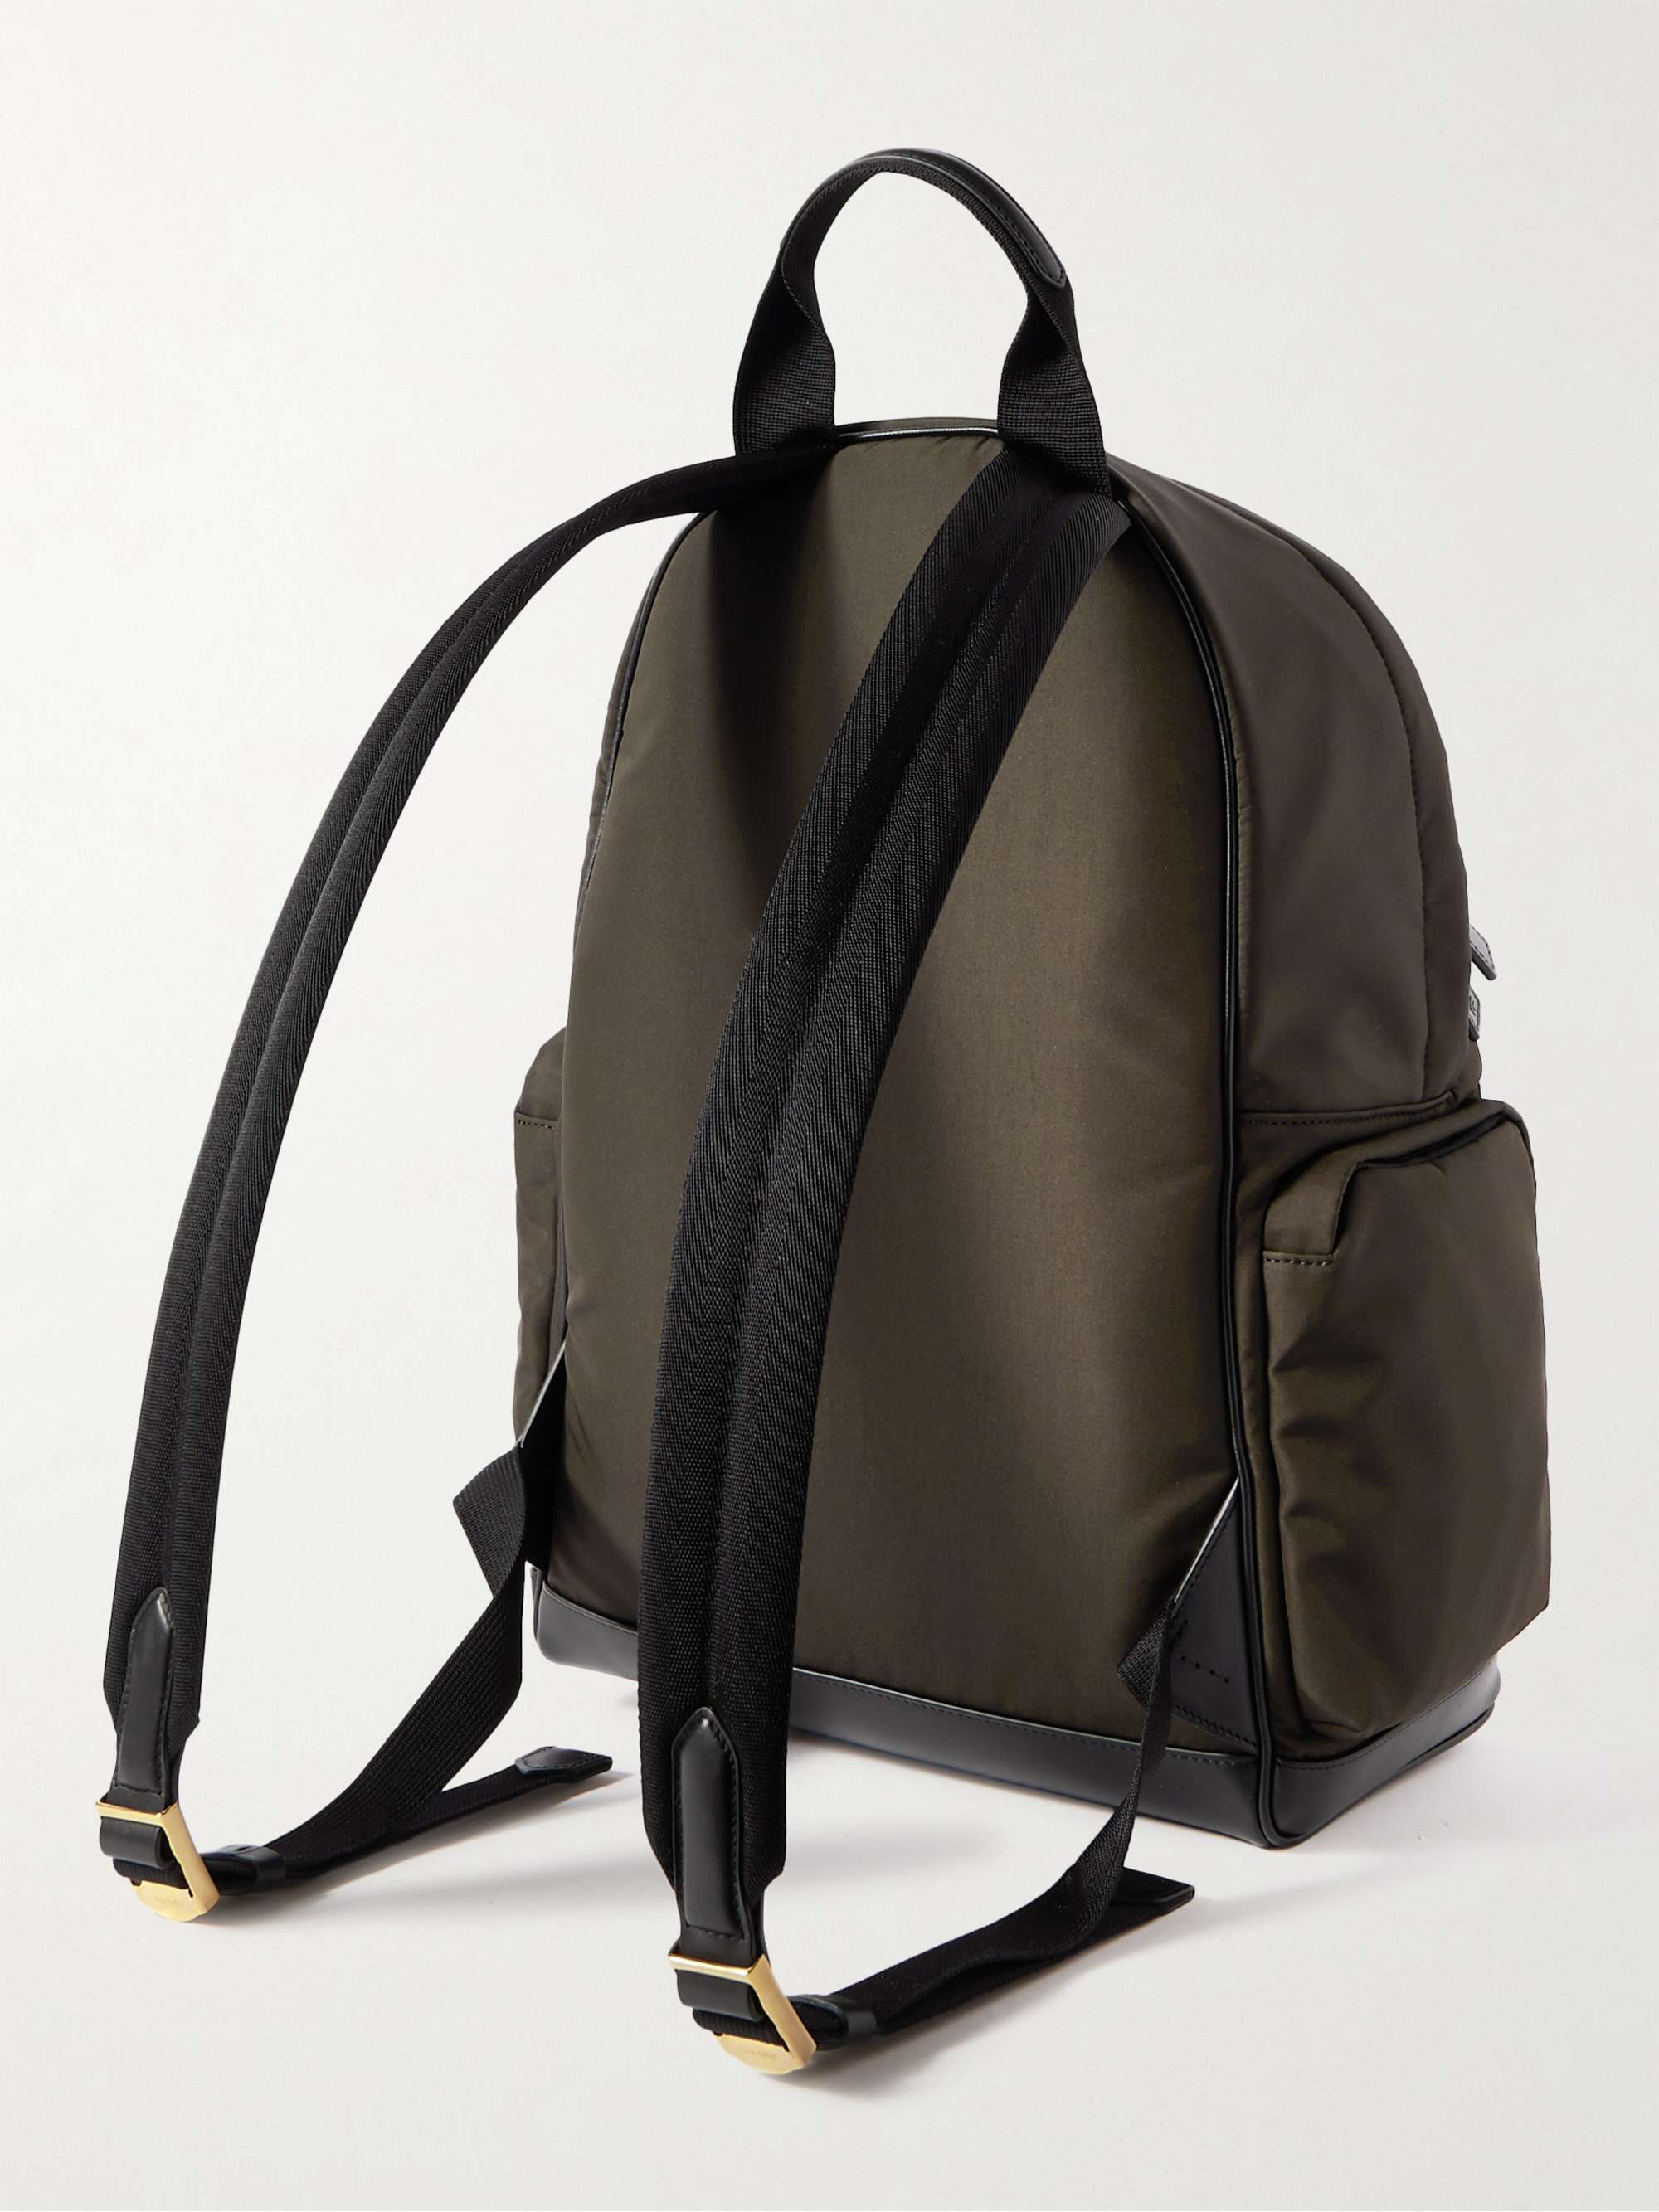 TOM FORD Leather-Trimmed Recycled-Nylon Backpack